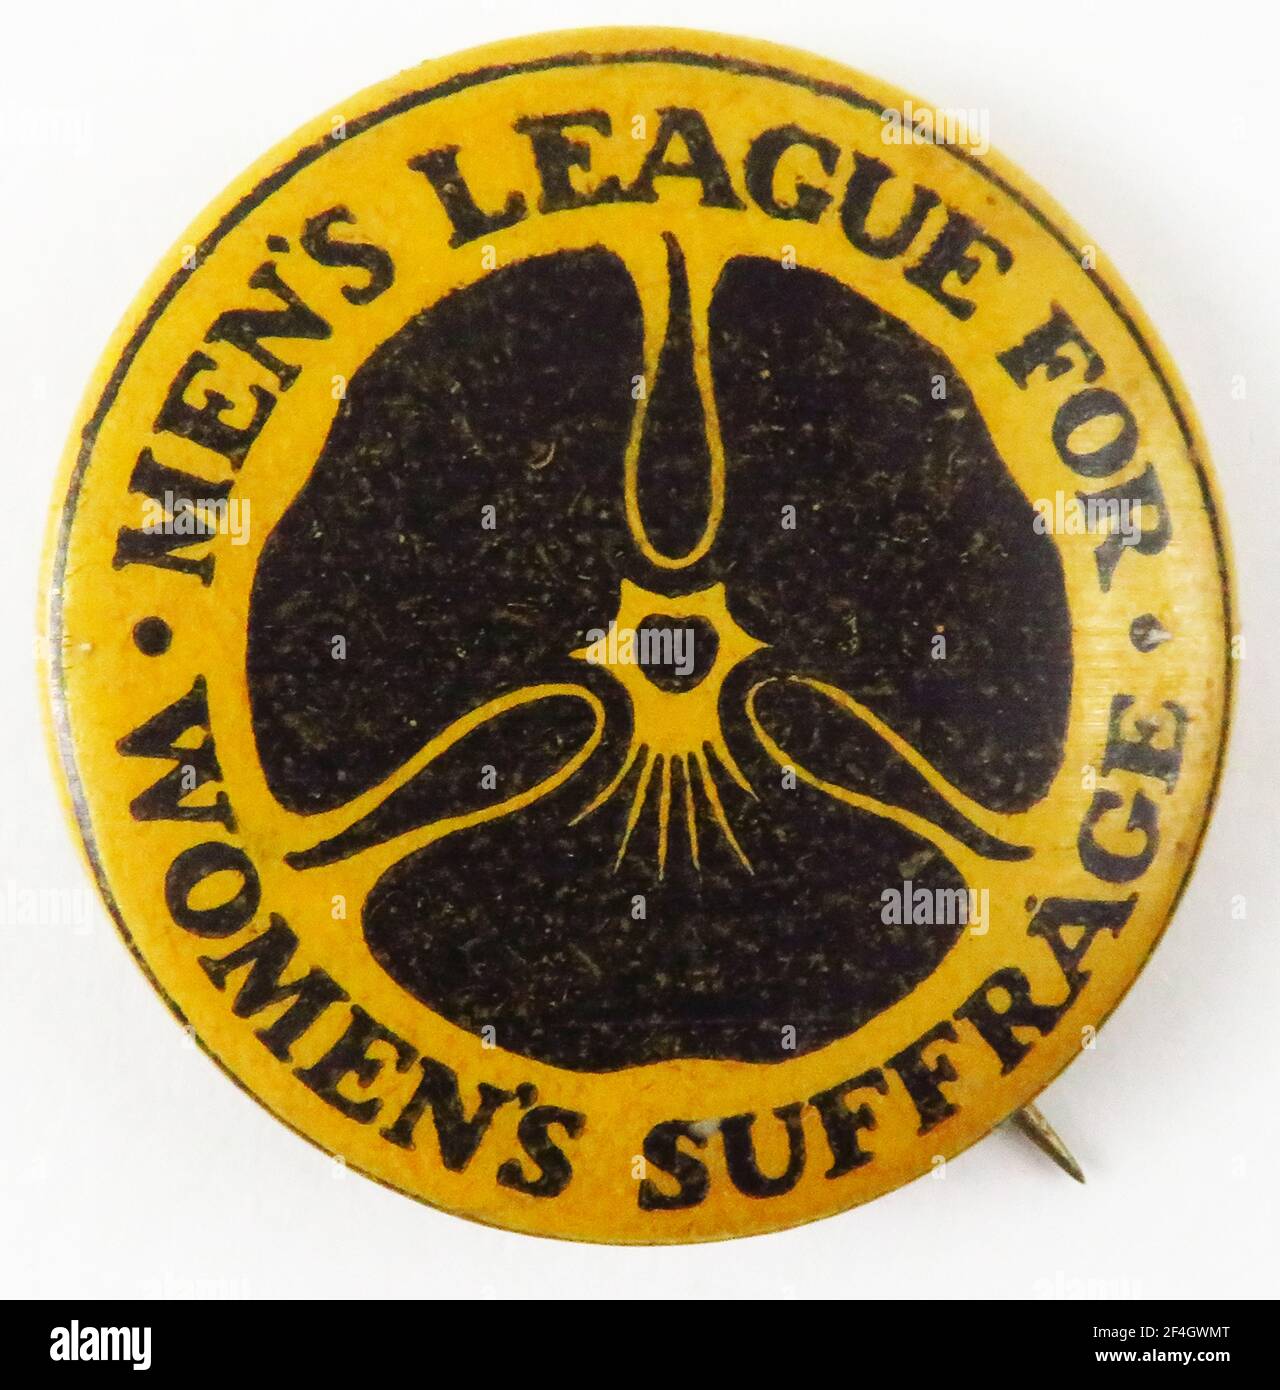 Yellow and black button for the Men's League for Women's Suffrage, a male organization promoting women's right to vote, United Kingdom, 1910. Photography by Emilia van Beugen. () Stock Photo